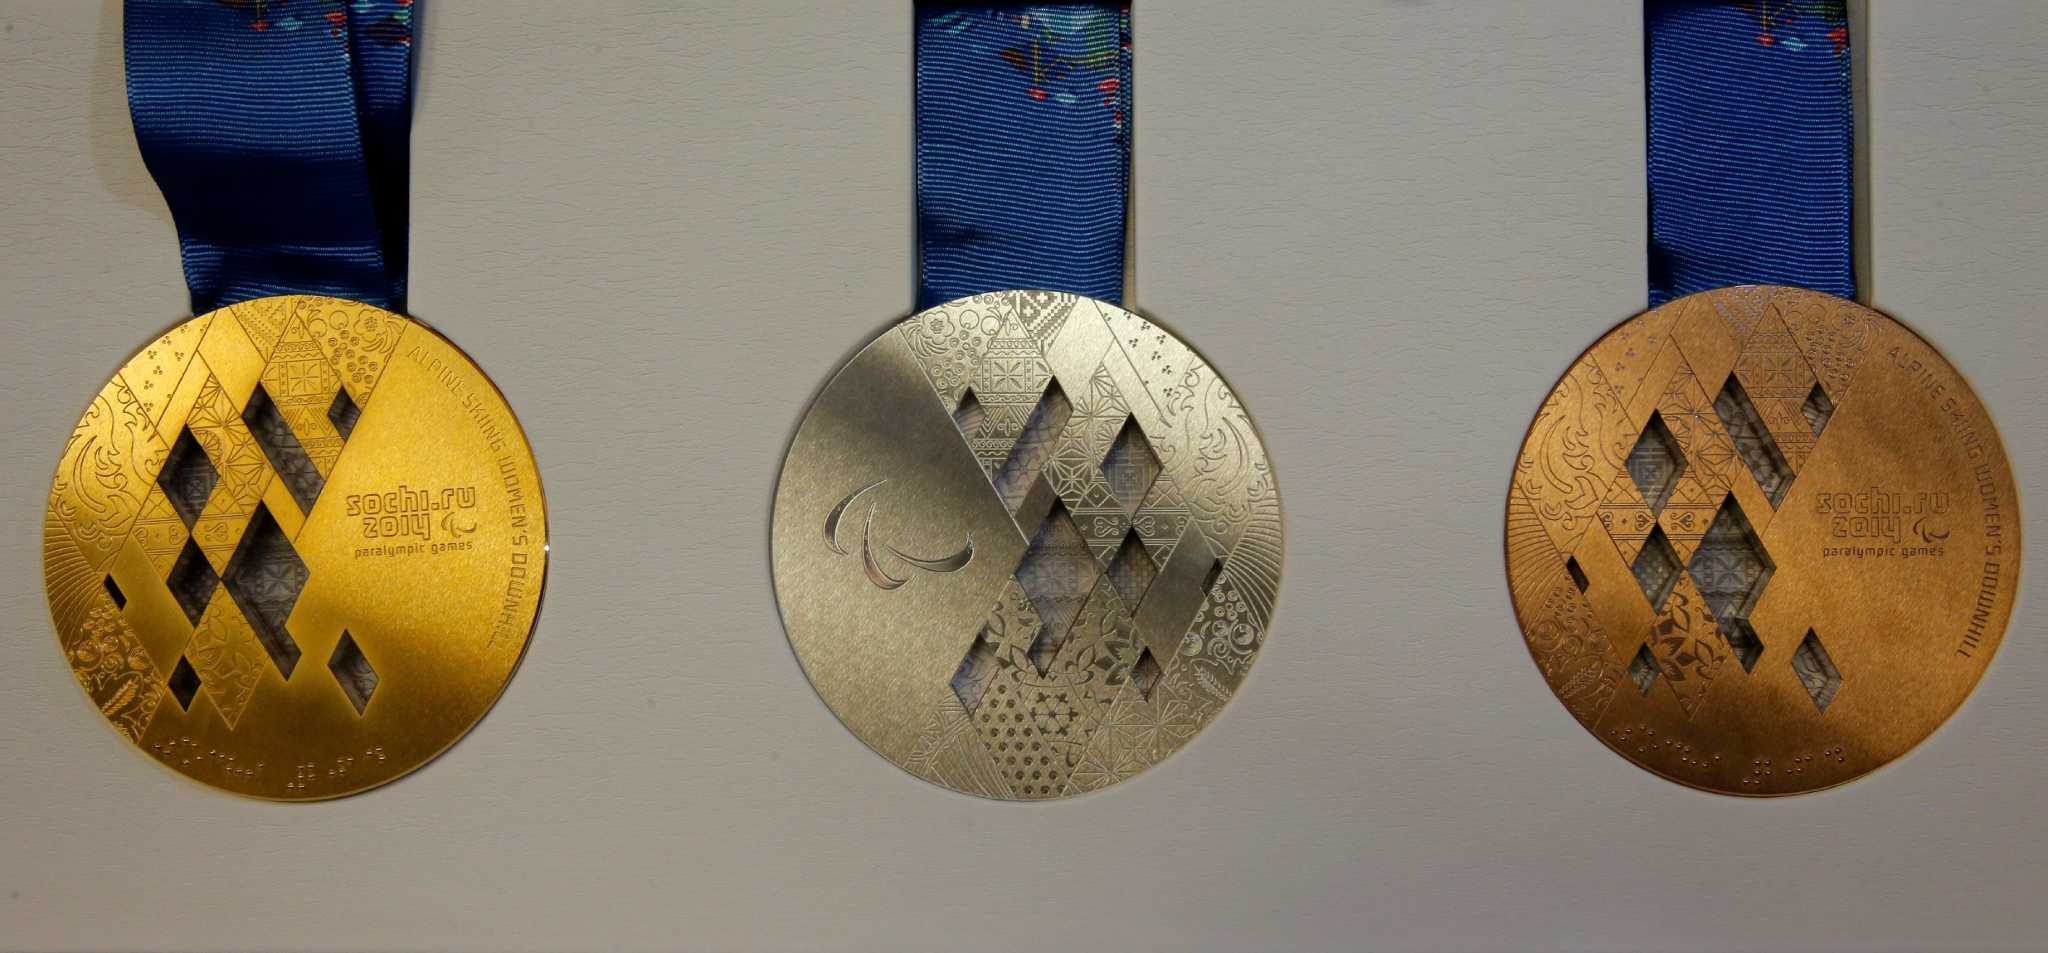 Sochi unveils medals for 2014 Winter Olympics